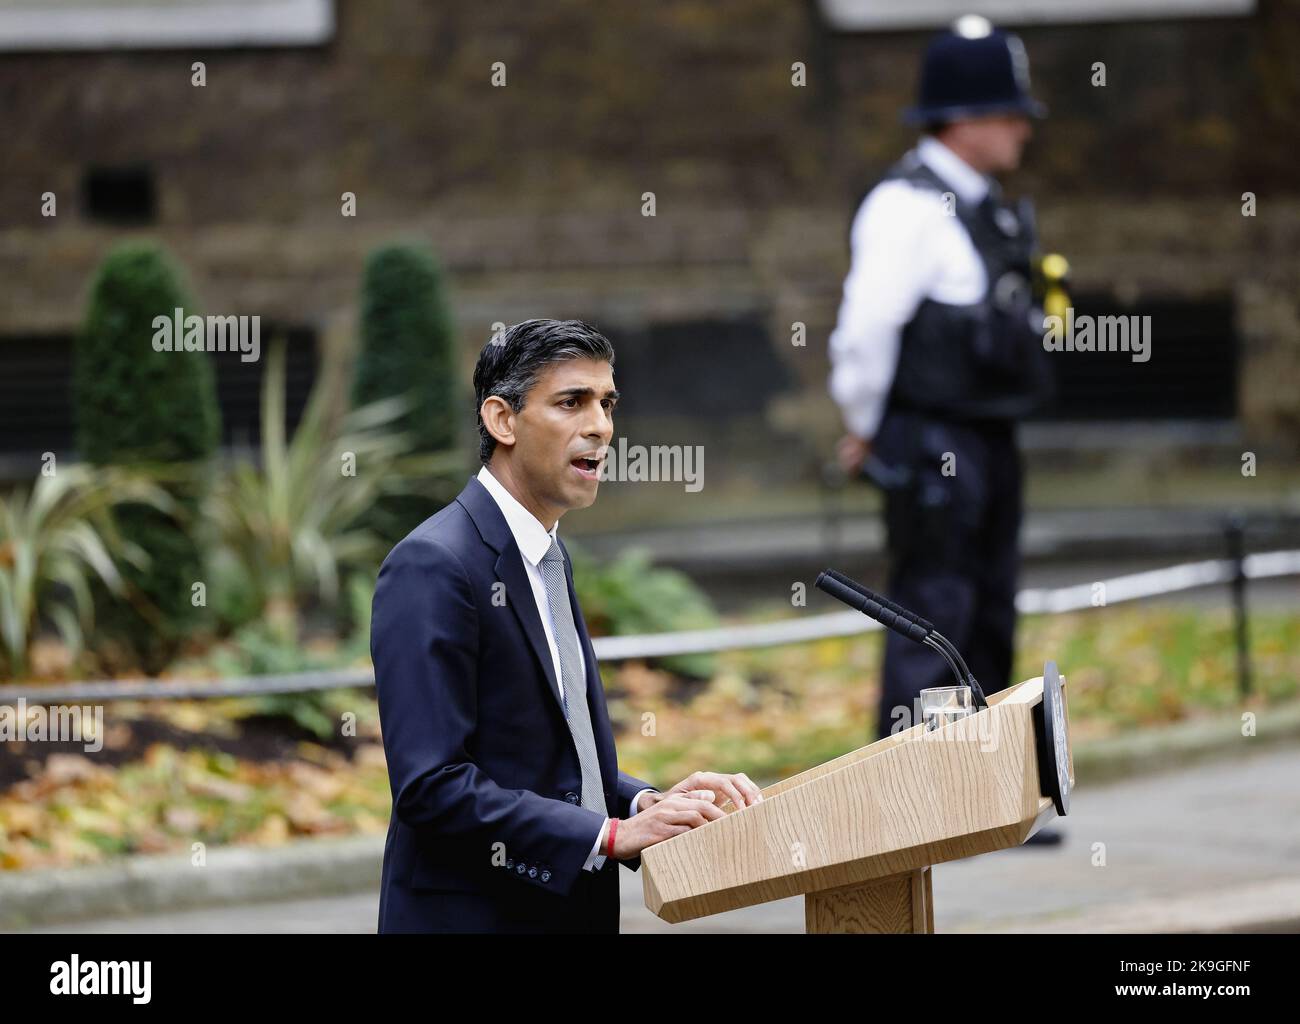 England, London, Westminster, 25th October 2022, New Prime Minister Rishi Sunak speaking in Downing Street as he takes over from Liz Truss. Stock Photo